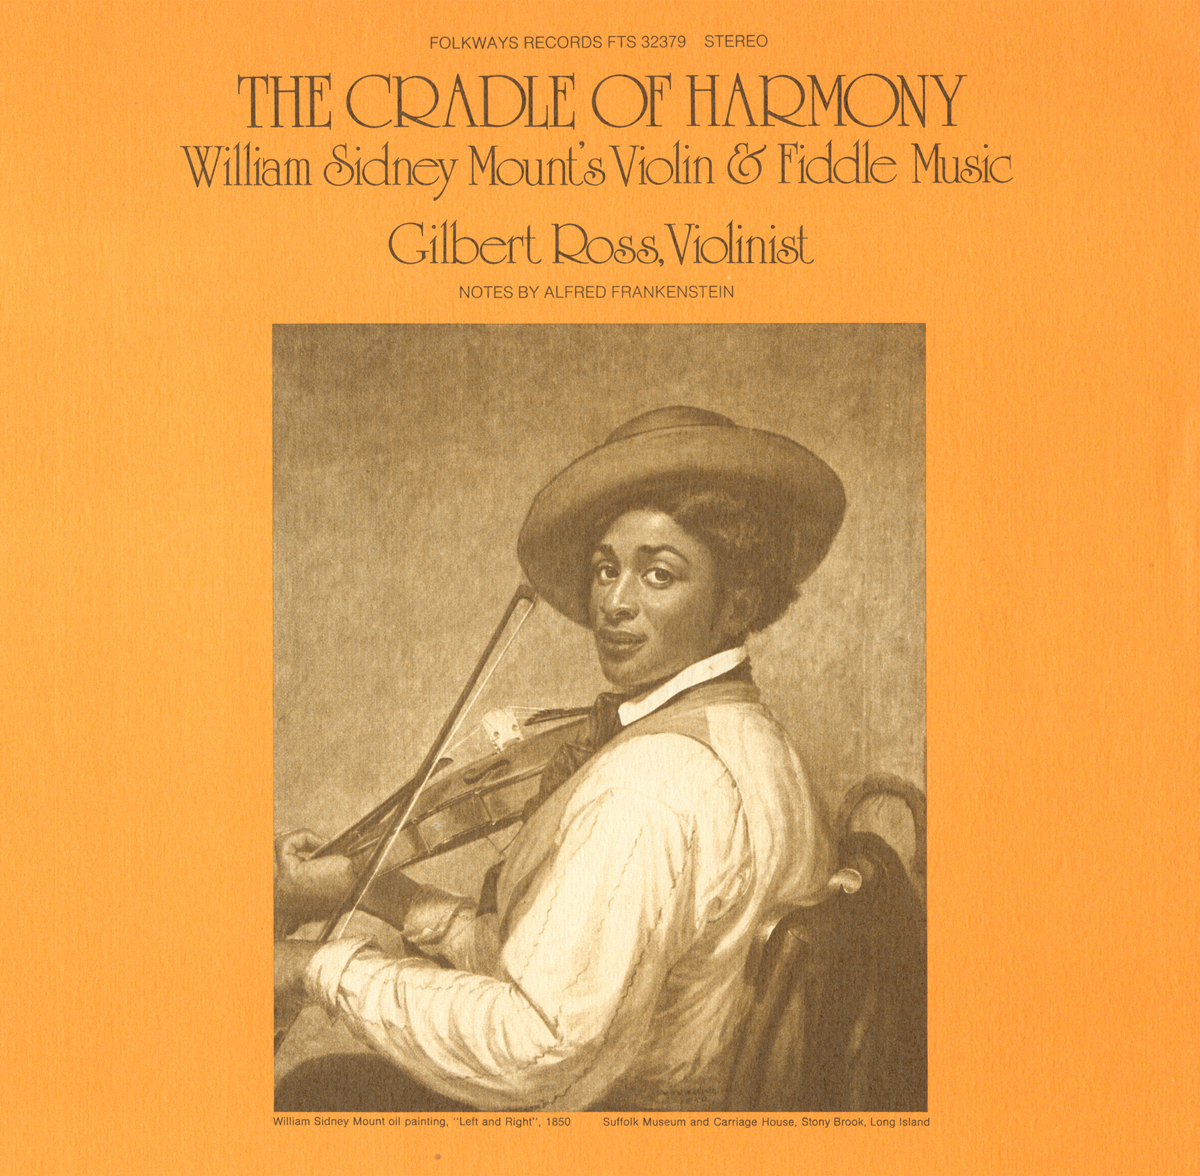 CRADLE OF HARMONY: VIOLIN AND FIDDLE MUSIC